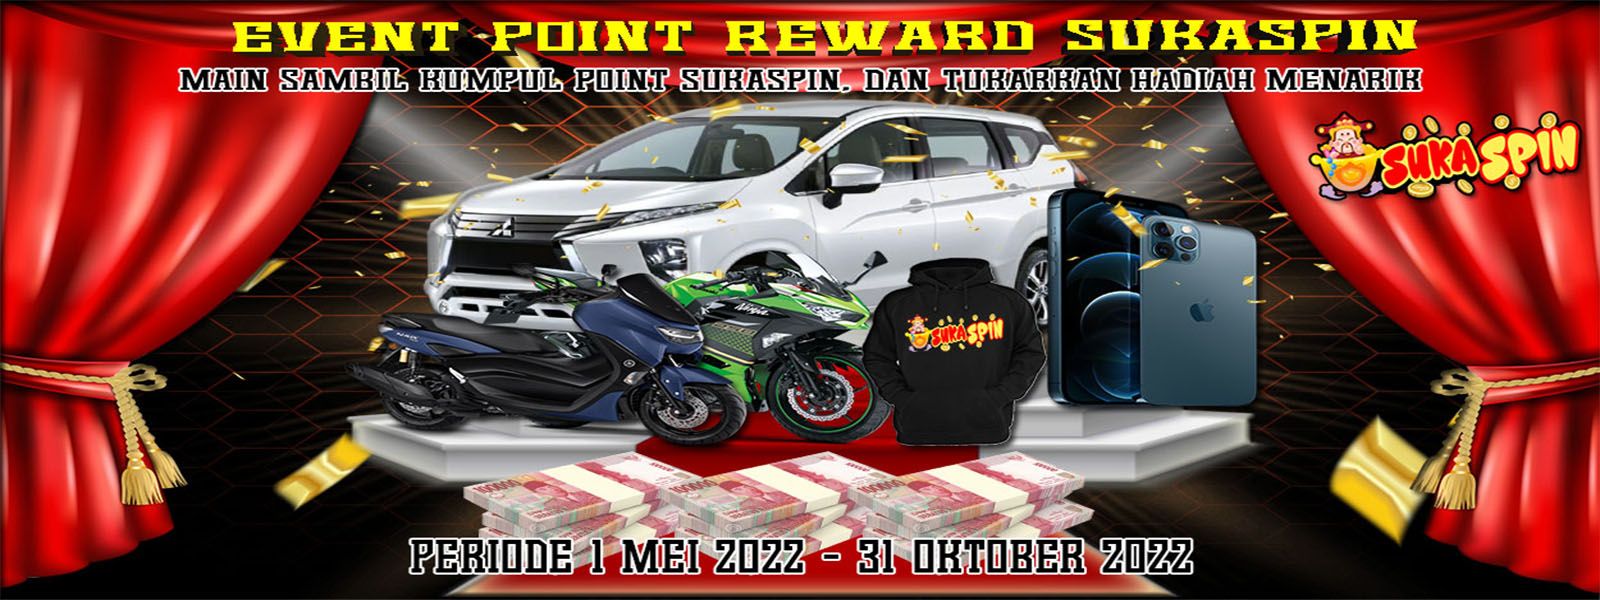 EVENT POINT SUKASPIN